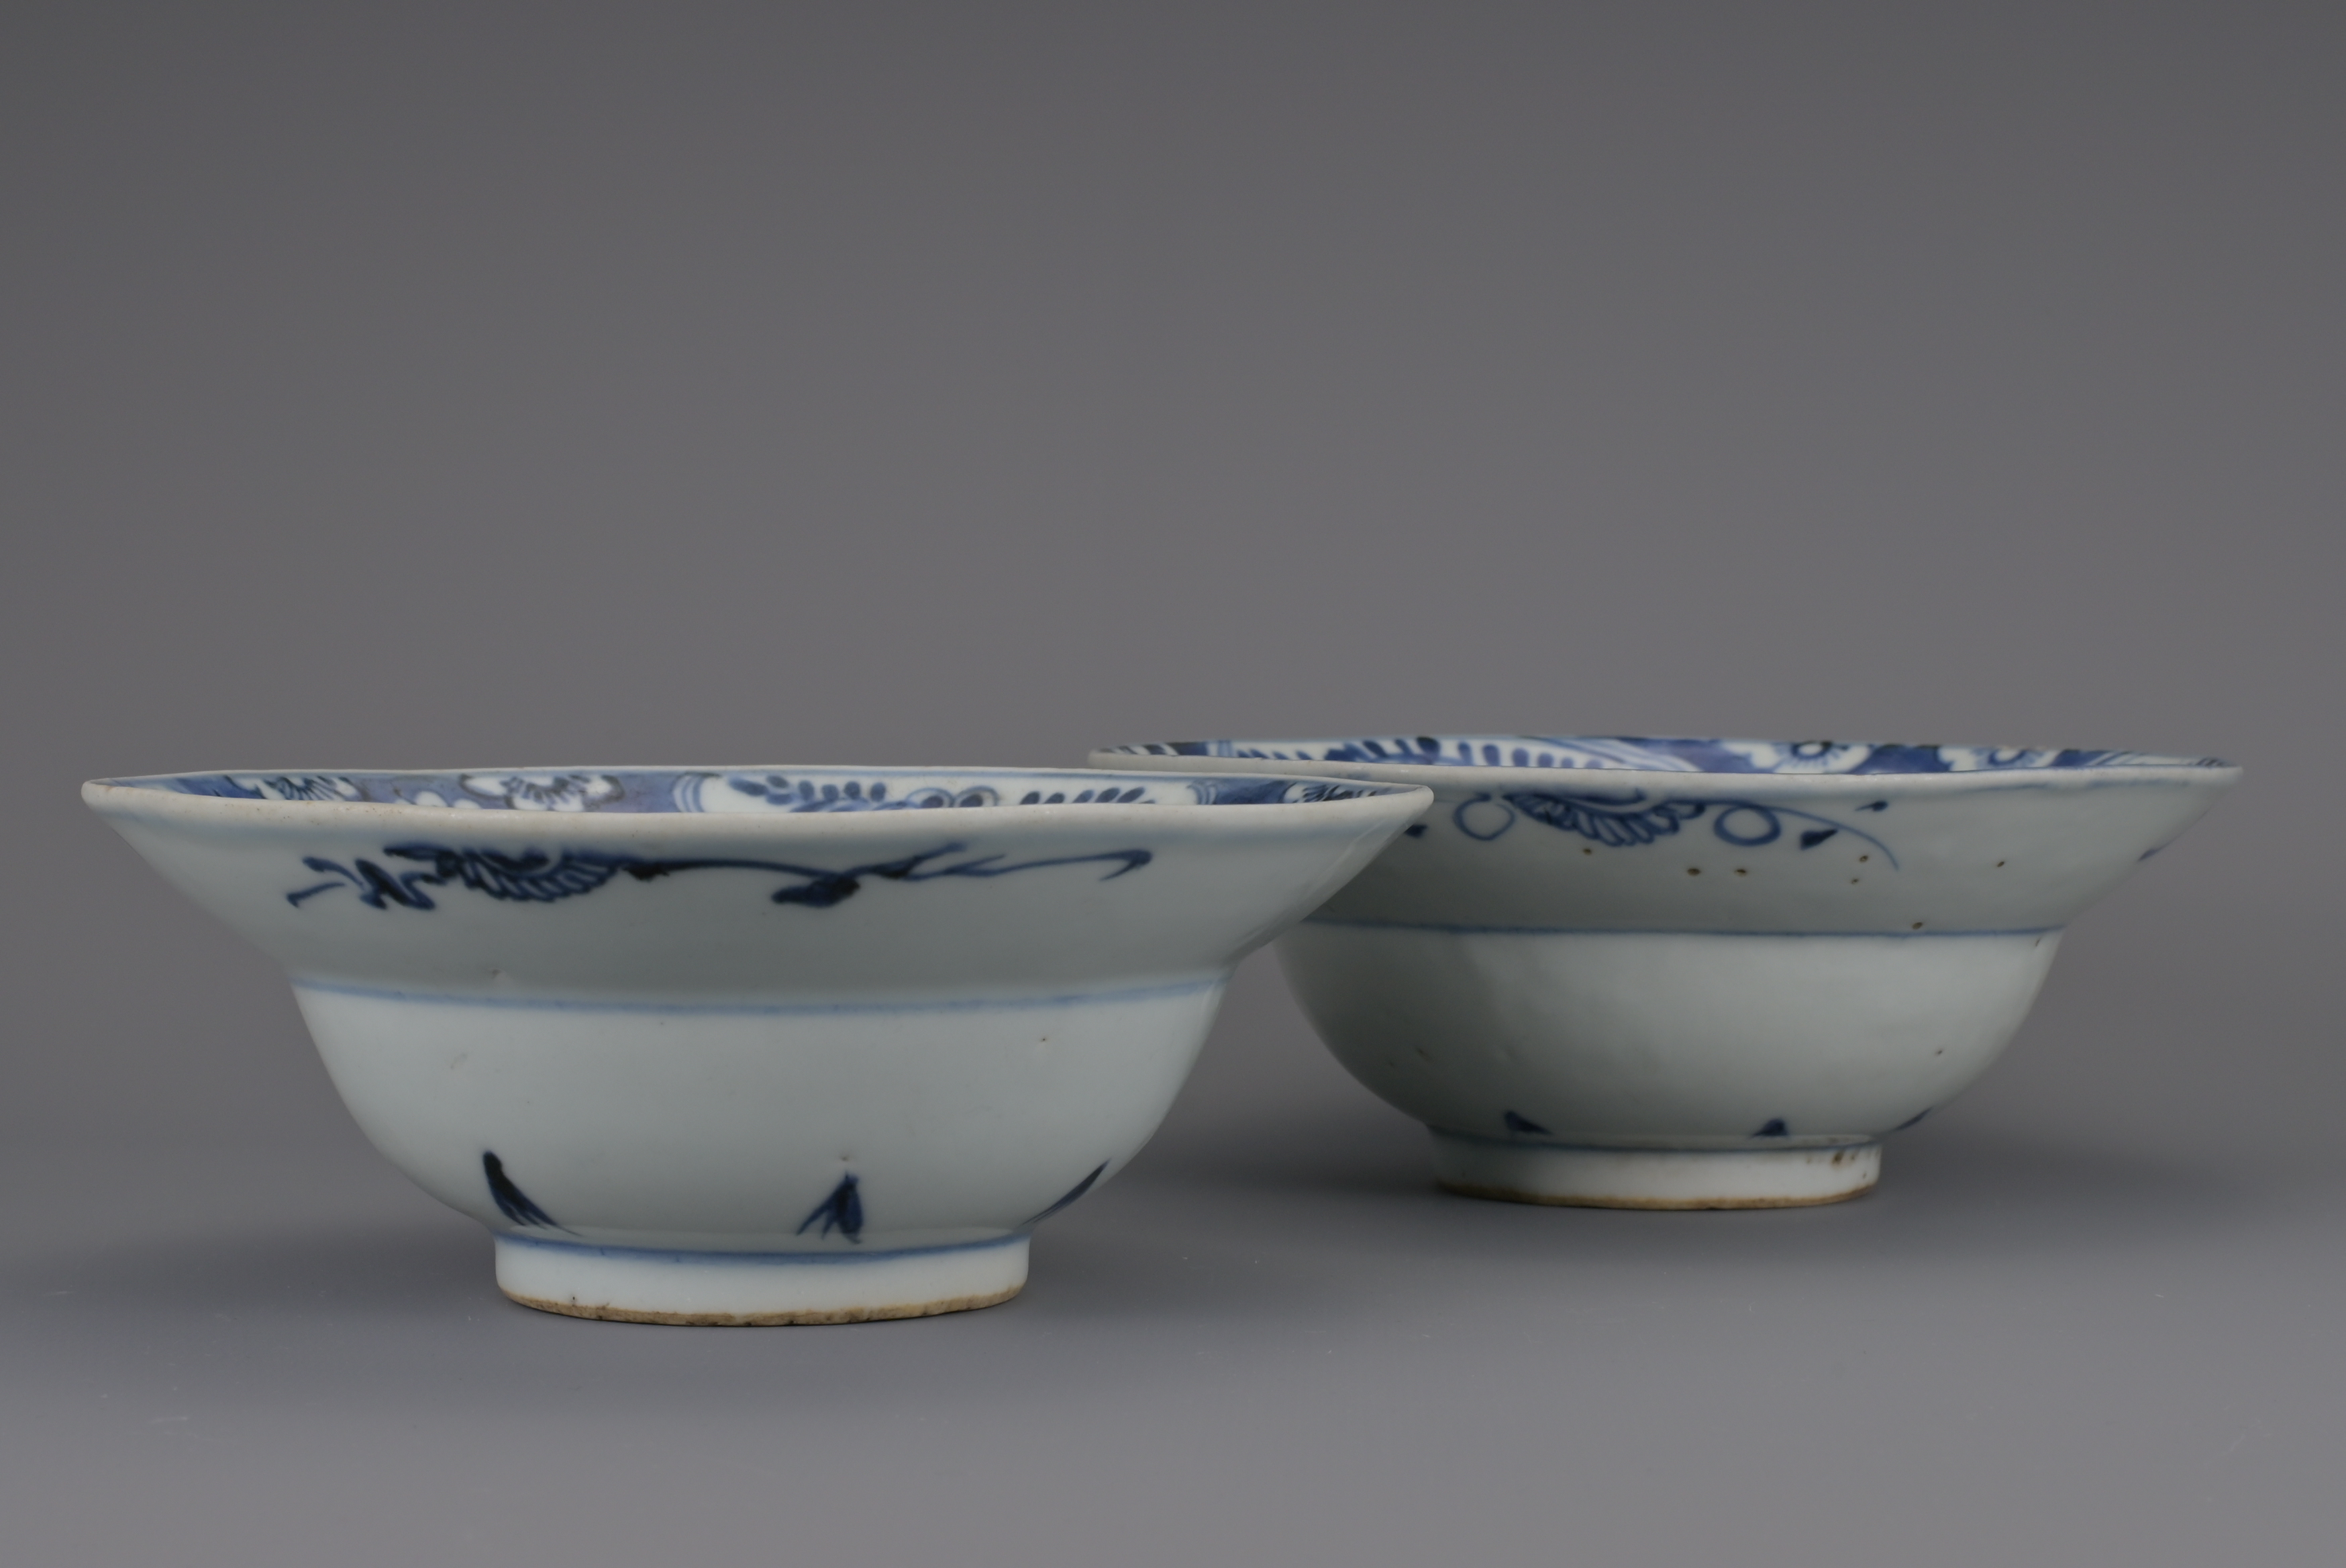 PAIR OF CHINESE BLUE AND WHITE PORCELAIN KLAPMUTS BOWLS, LATE MING DYNASTY, 17th CENTURY - Image 8 of 9